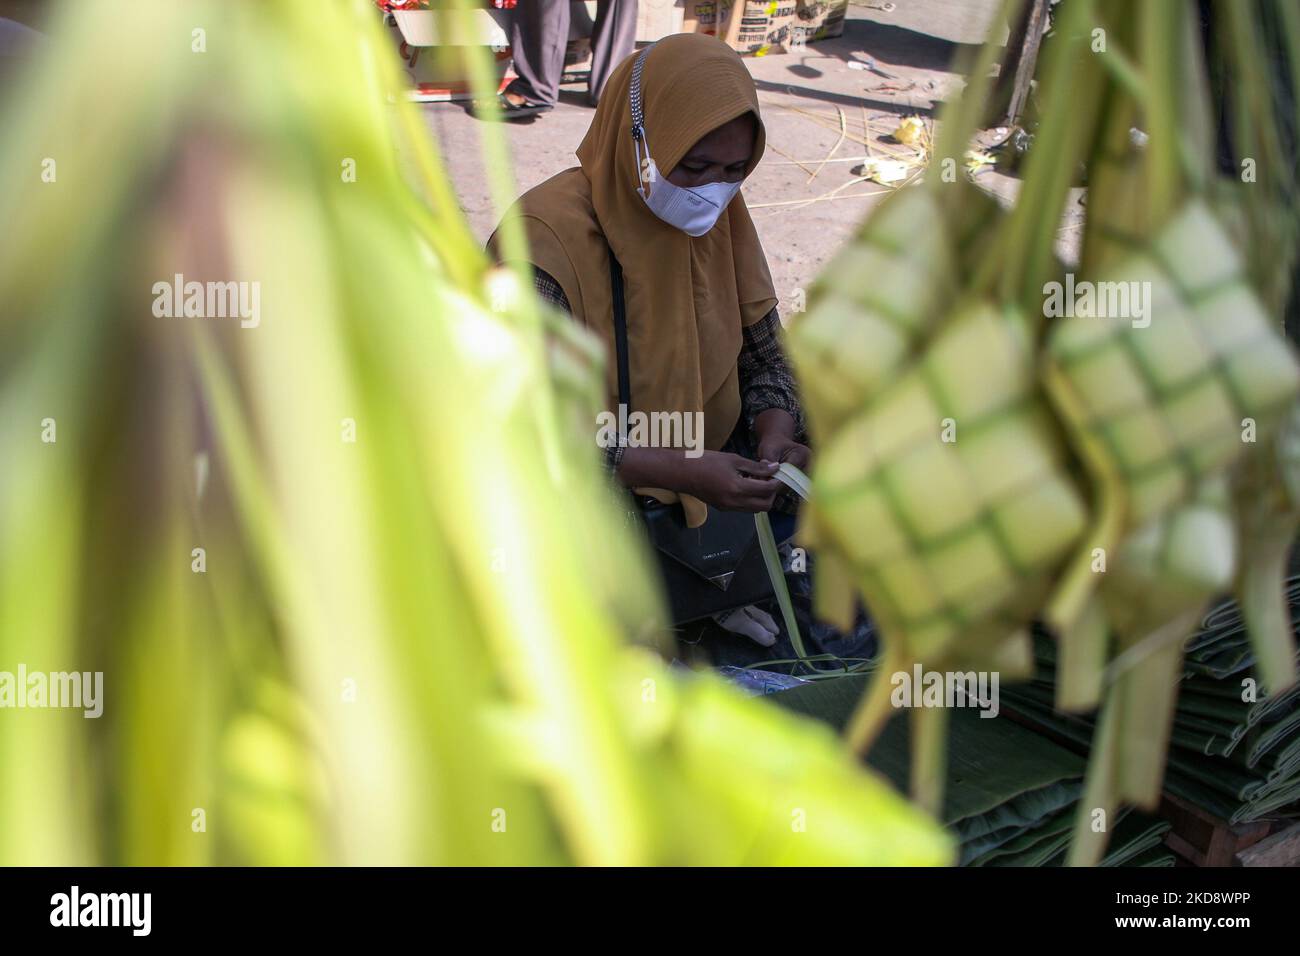 A trader weaves coconut leaves used to make traditional rice cakes called 'Ketupat' preparations ahead of Eid al-Fitr, at a traditional market in Lhokseumawe, On May 1, 2022, Indonesia. (Photo by Fachrul Reza/NurPhoto) Stock Photo